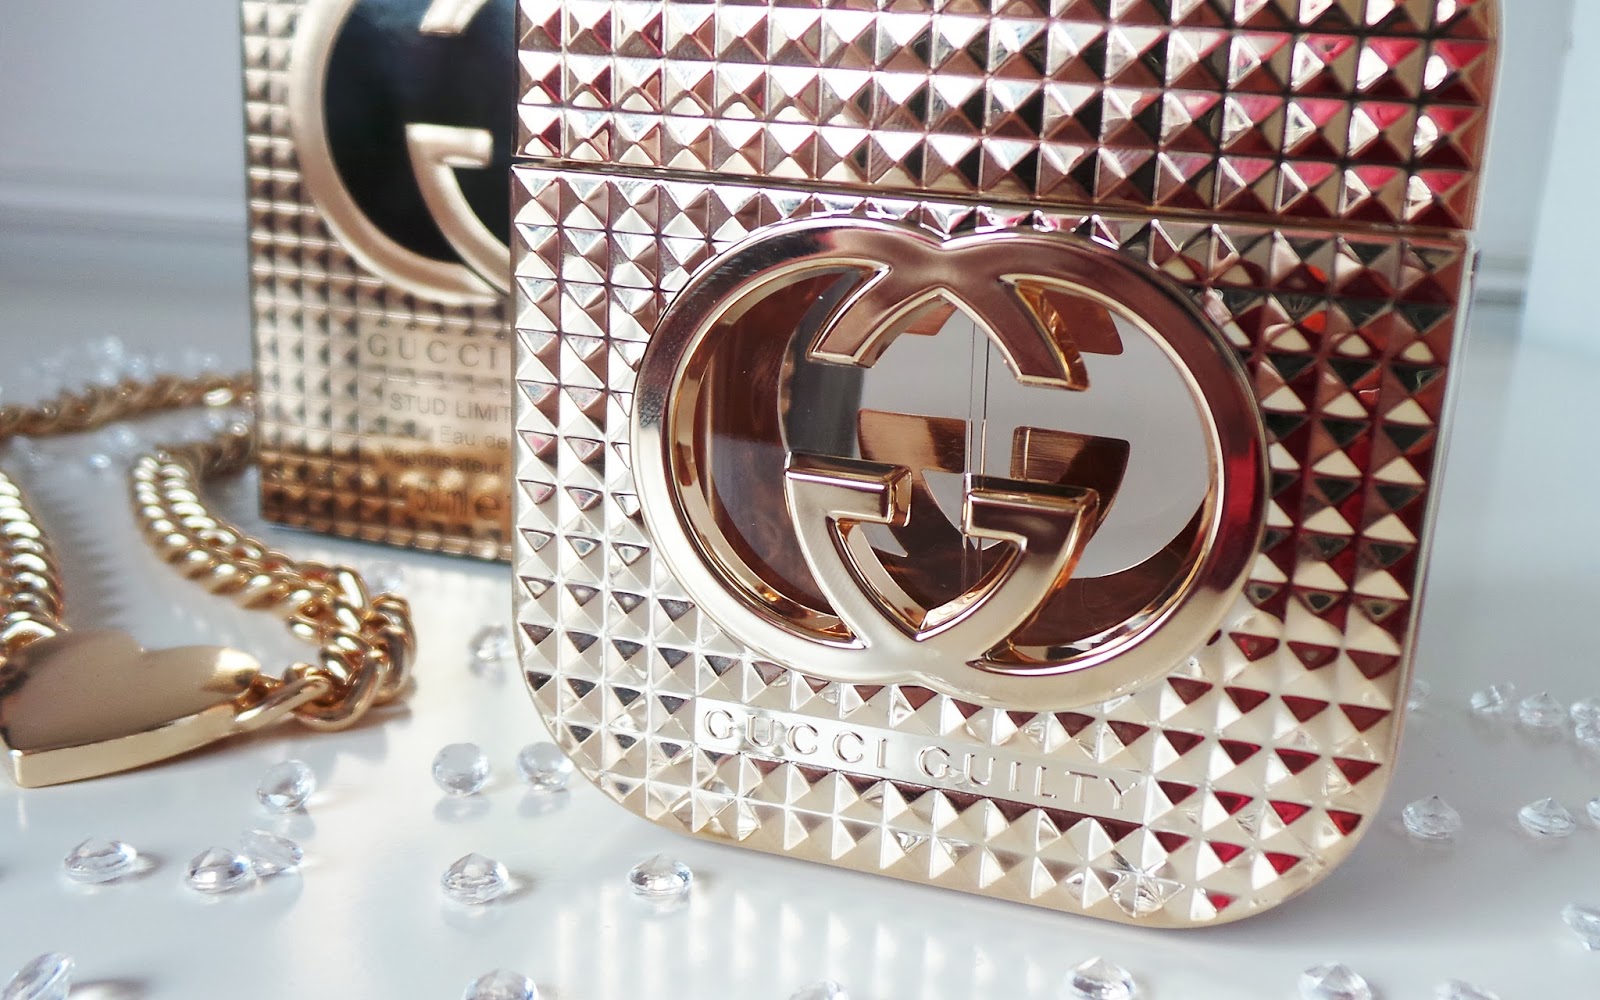 gucci guilty stud limited edition 75ml